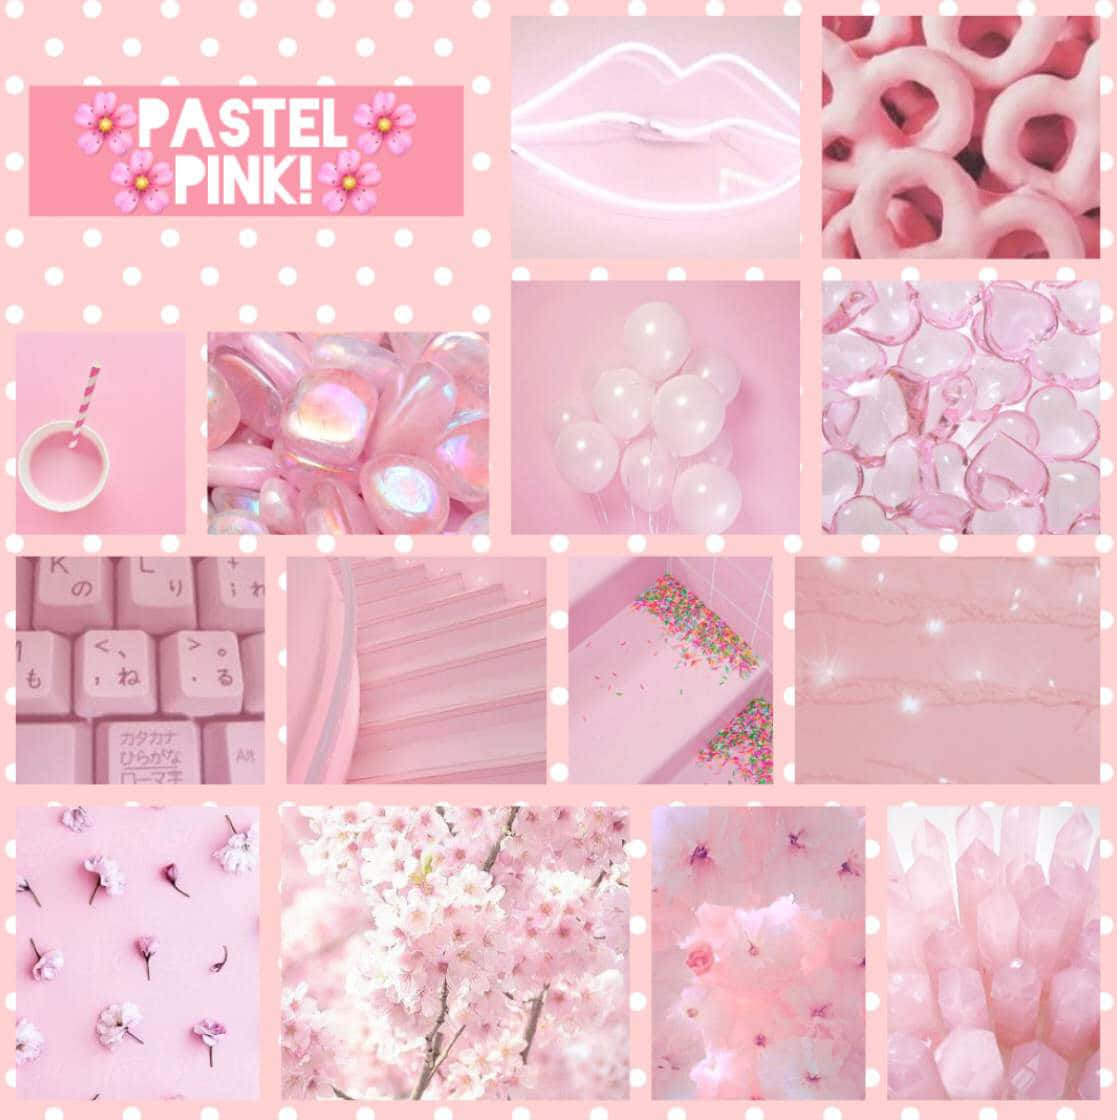 Go for a pastel pink aesthetic look with this pink and white wallpaper!